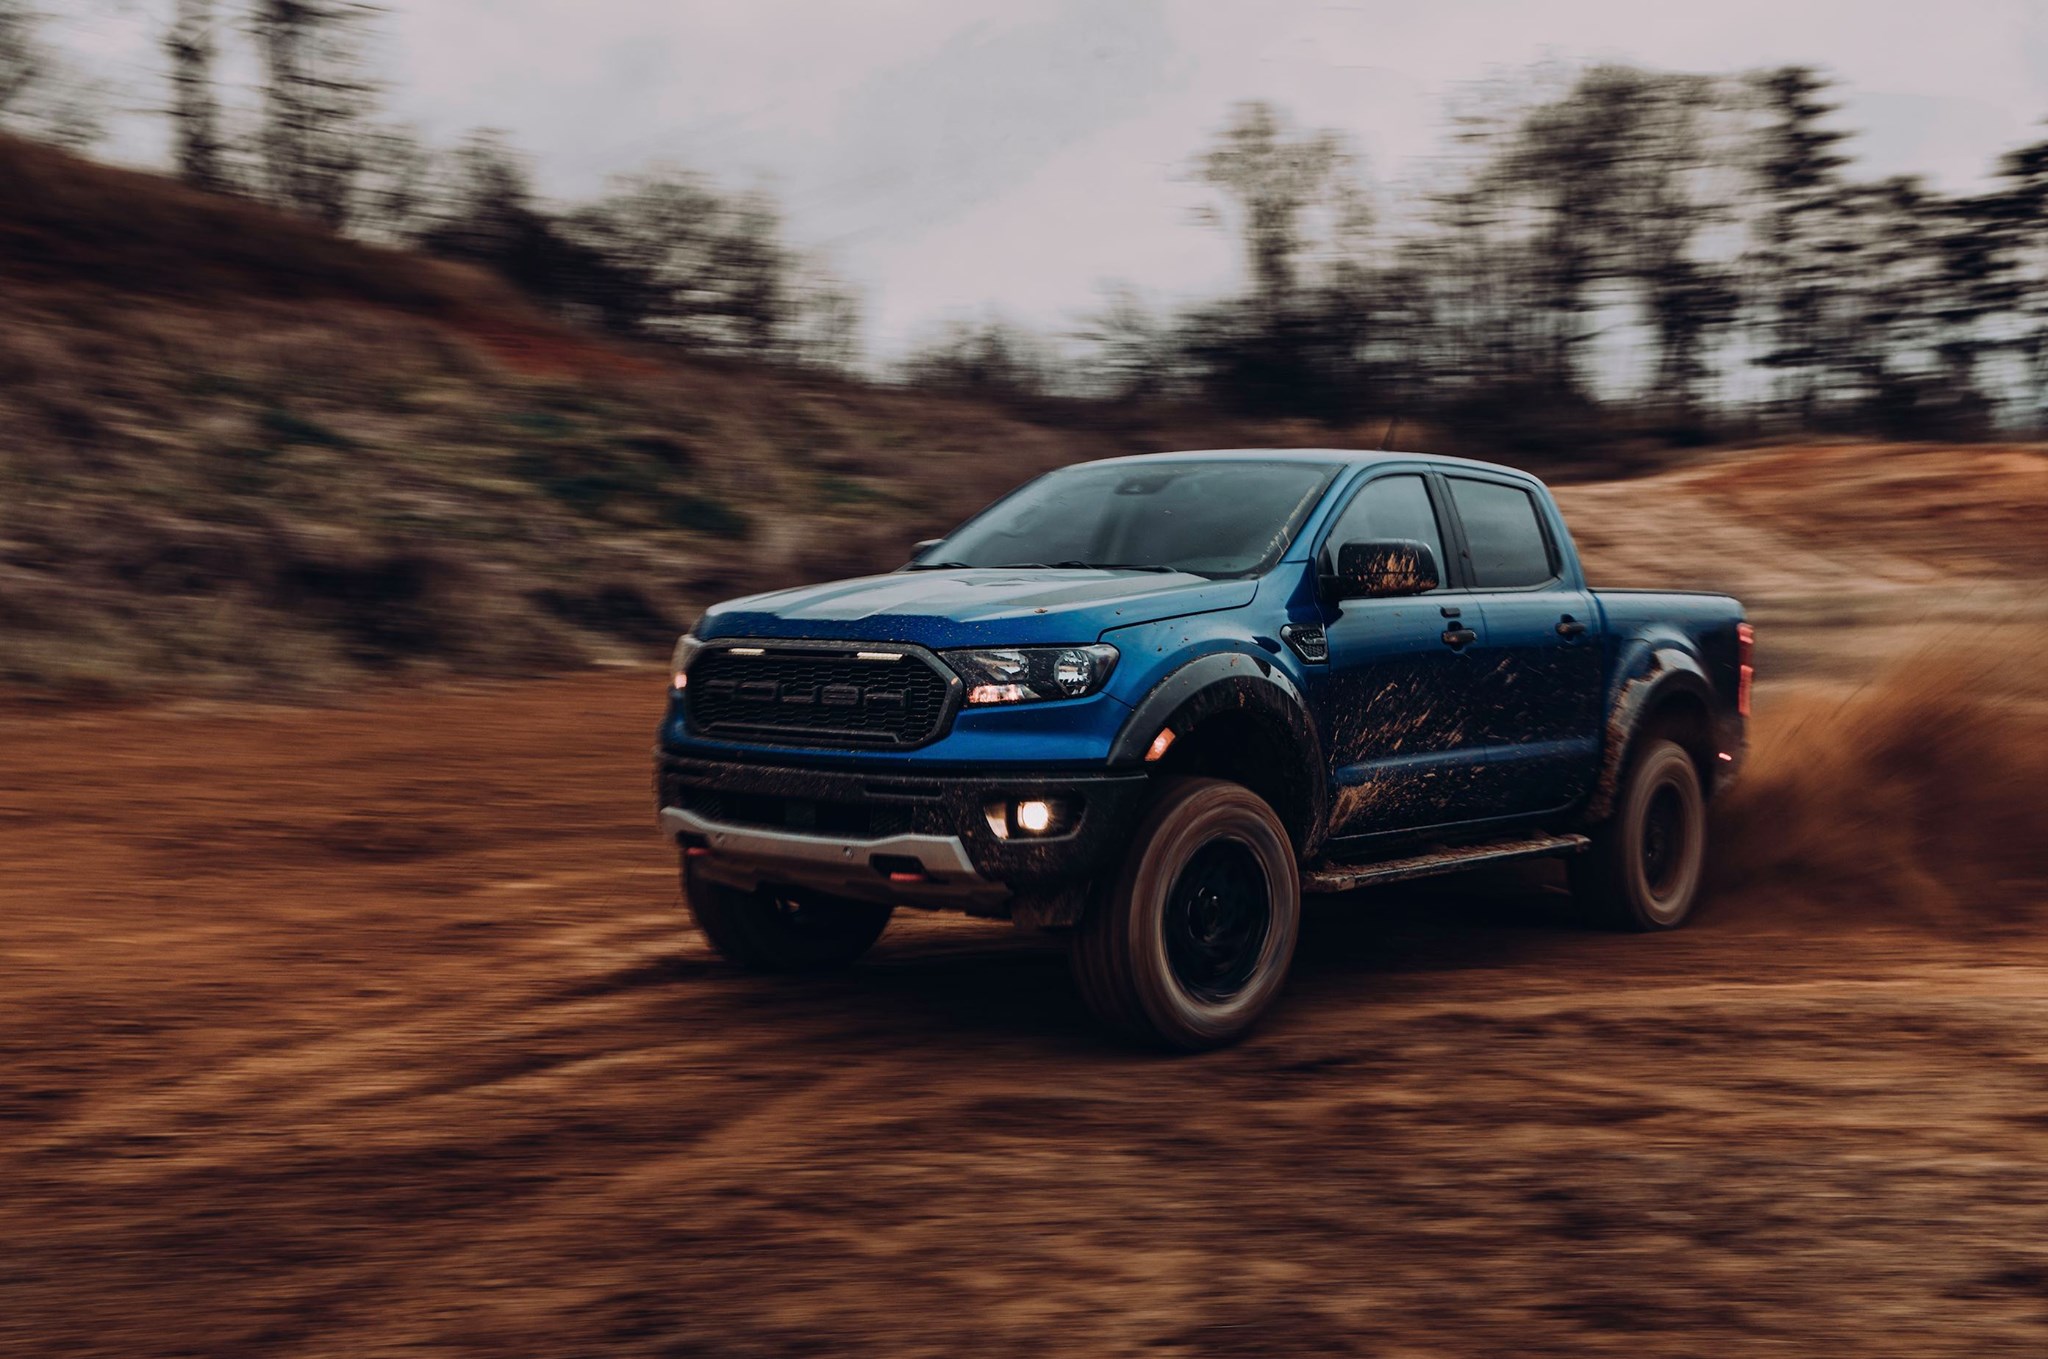 2021 Ford Ranger Gets Dressed Up in Roush Performance Attire for